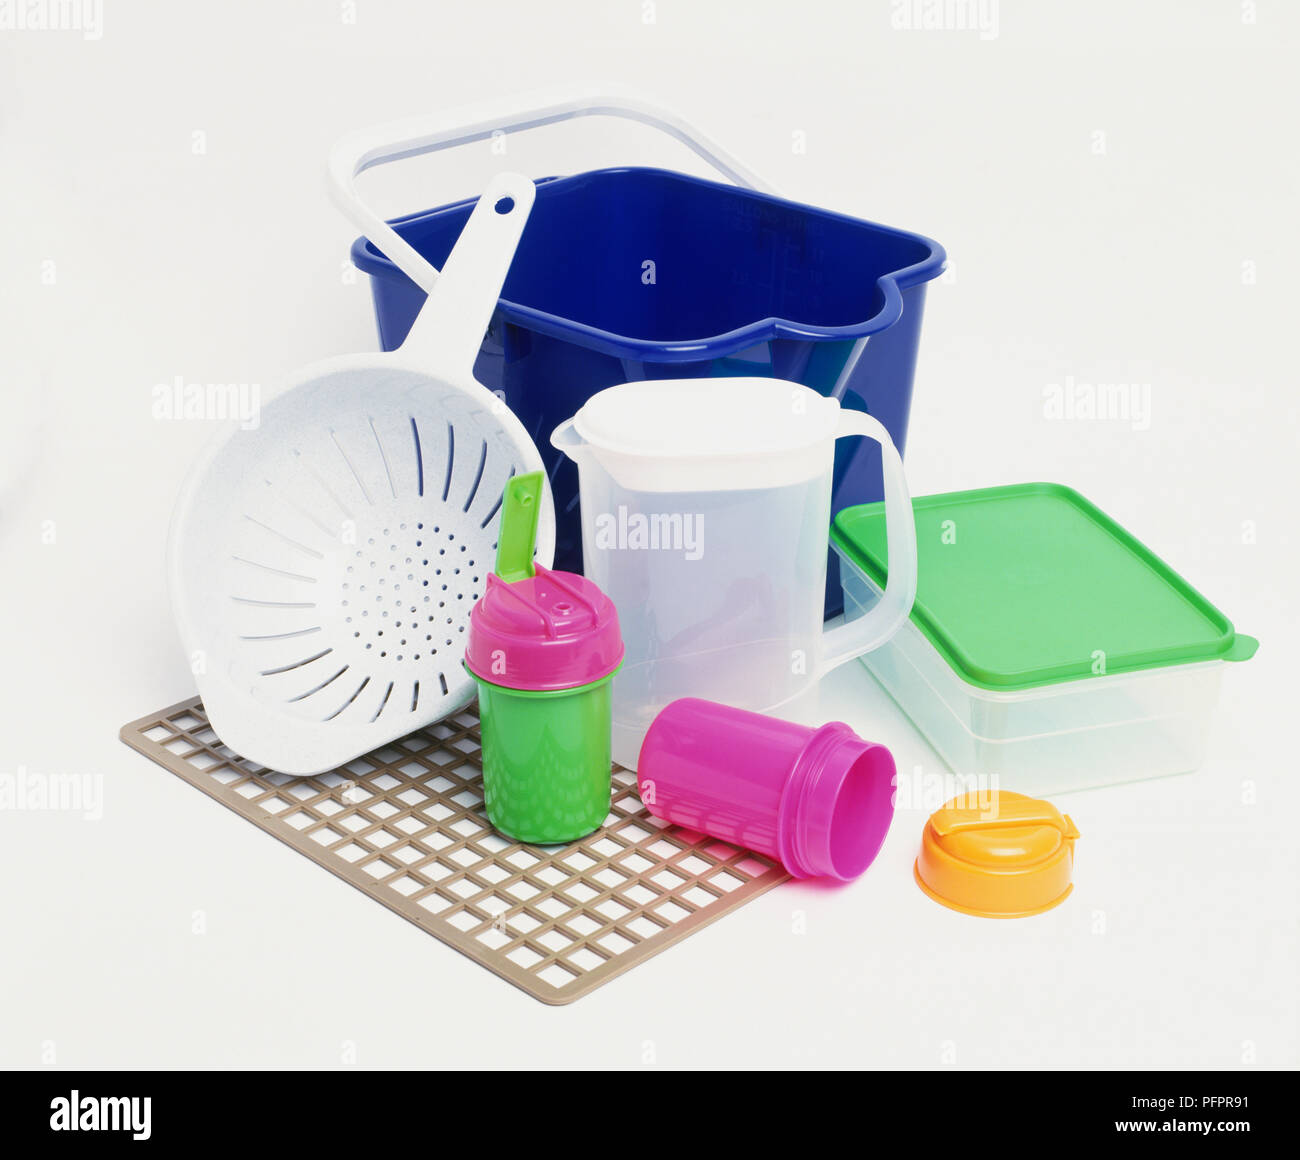 Assorted containers and kitchenware made of plastic Stock Photo - Alamy